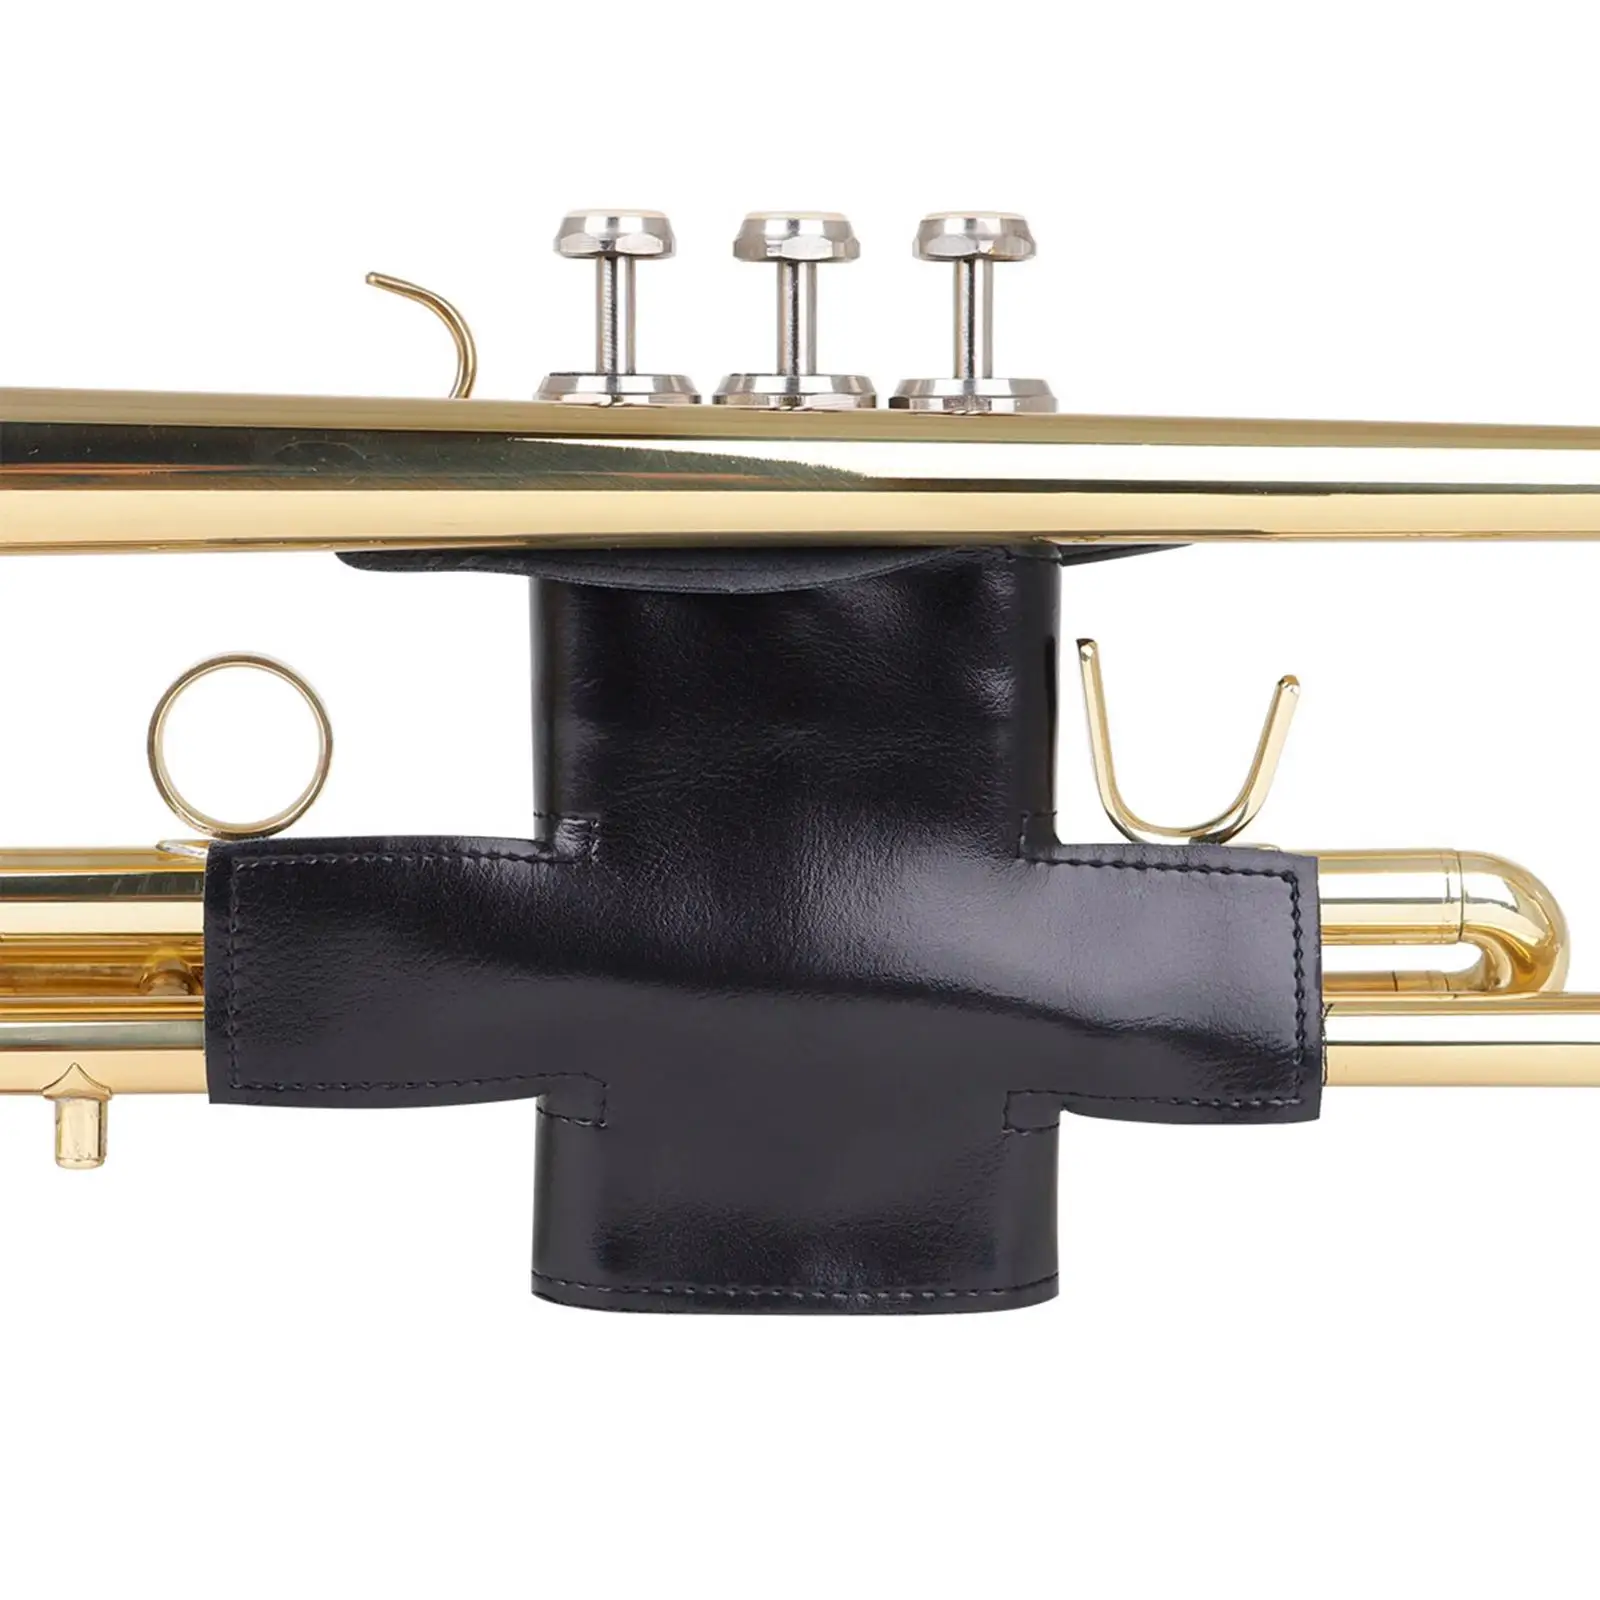 Trumpet Guard PU Leather Trumpet Protector Cover, Protection from